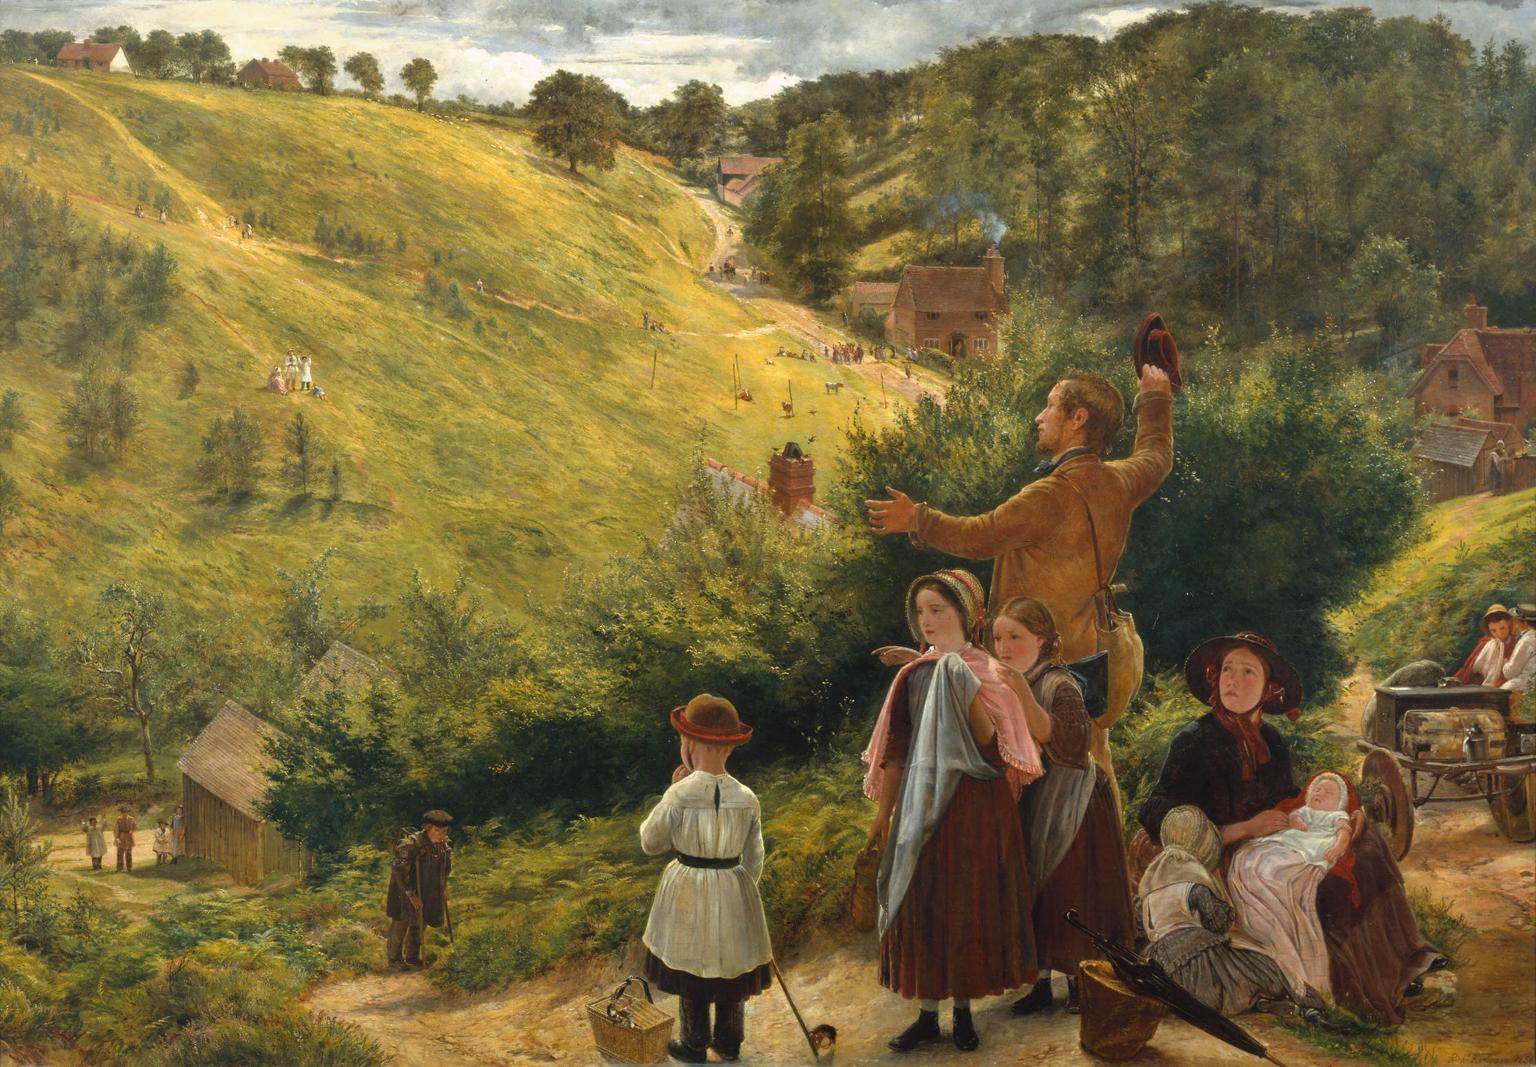 Richard Redgrave, The Emigrant’s Last Sight of Home, 1858, oil on canvas, 67.9 x 98.4 cm (Tate, London)